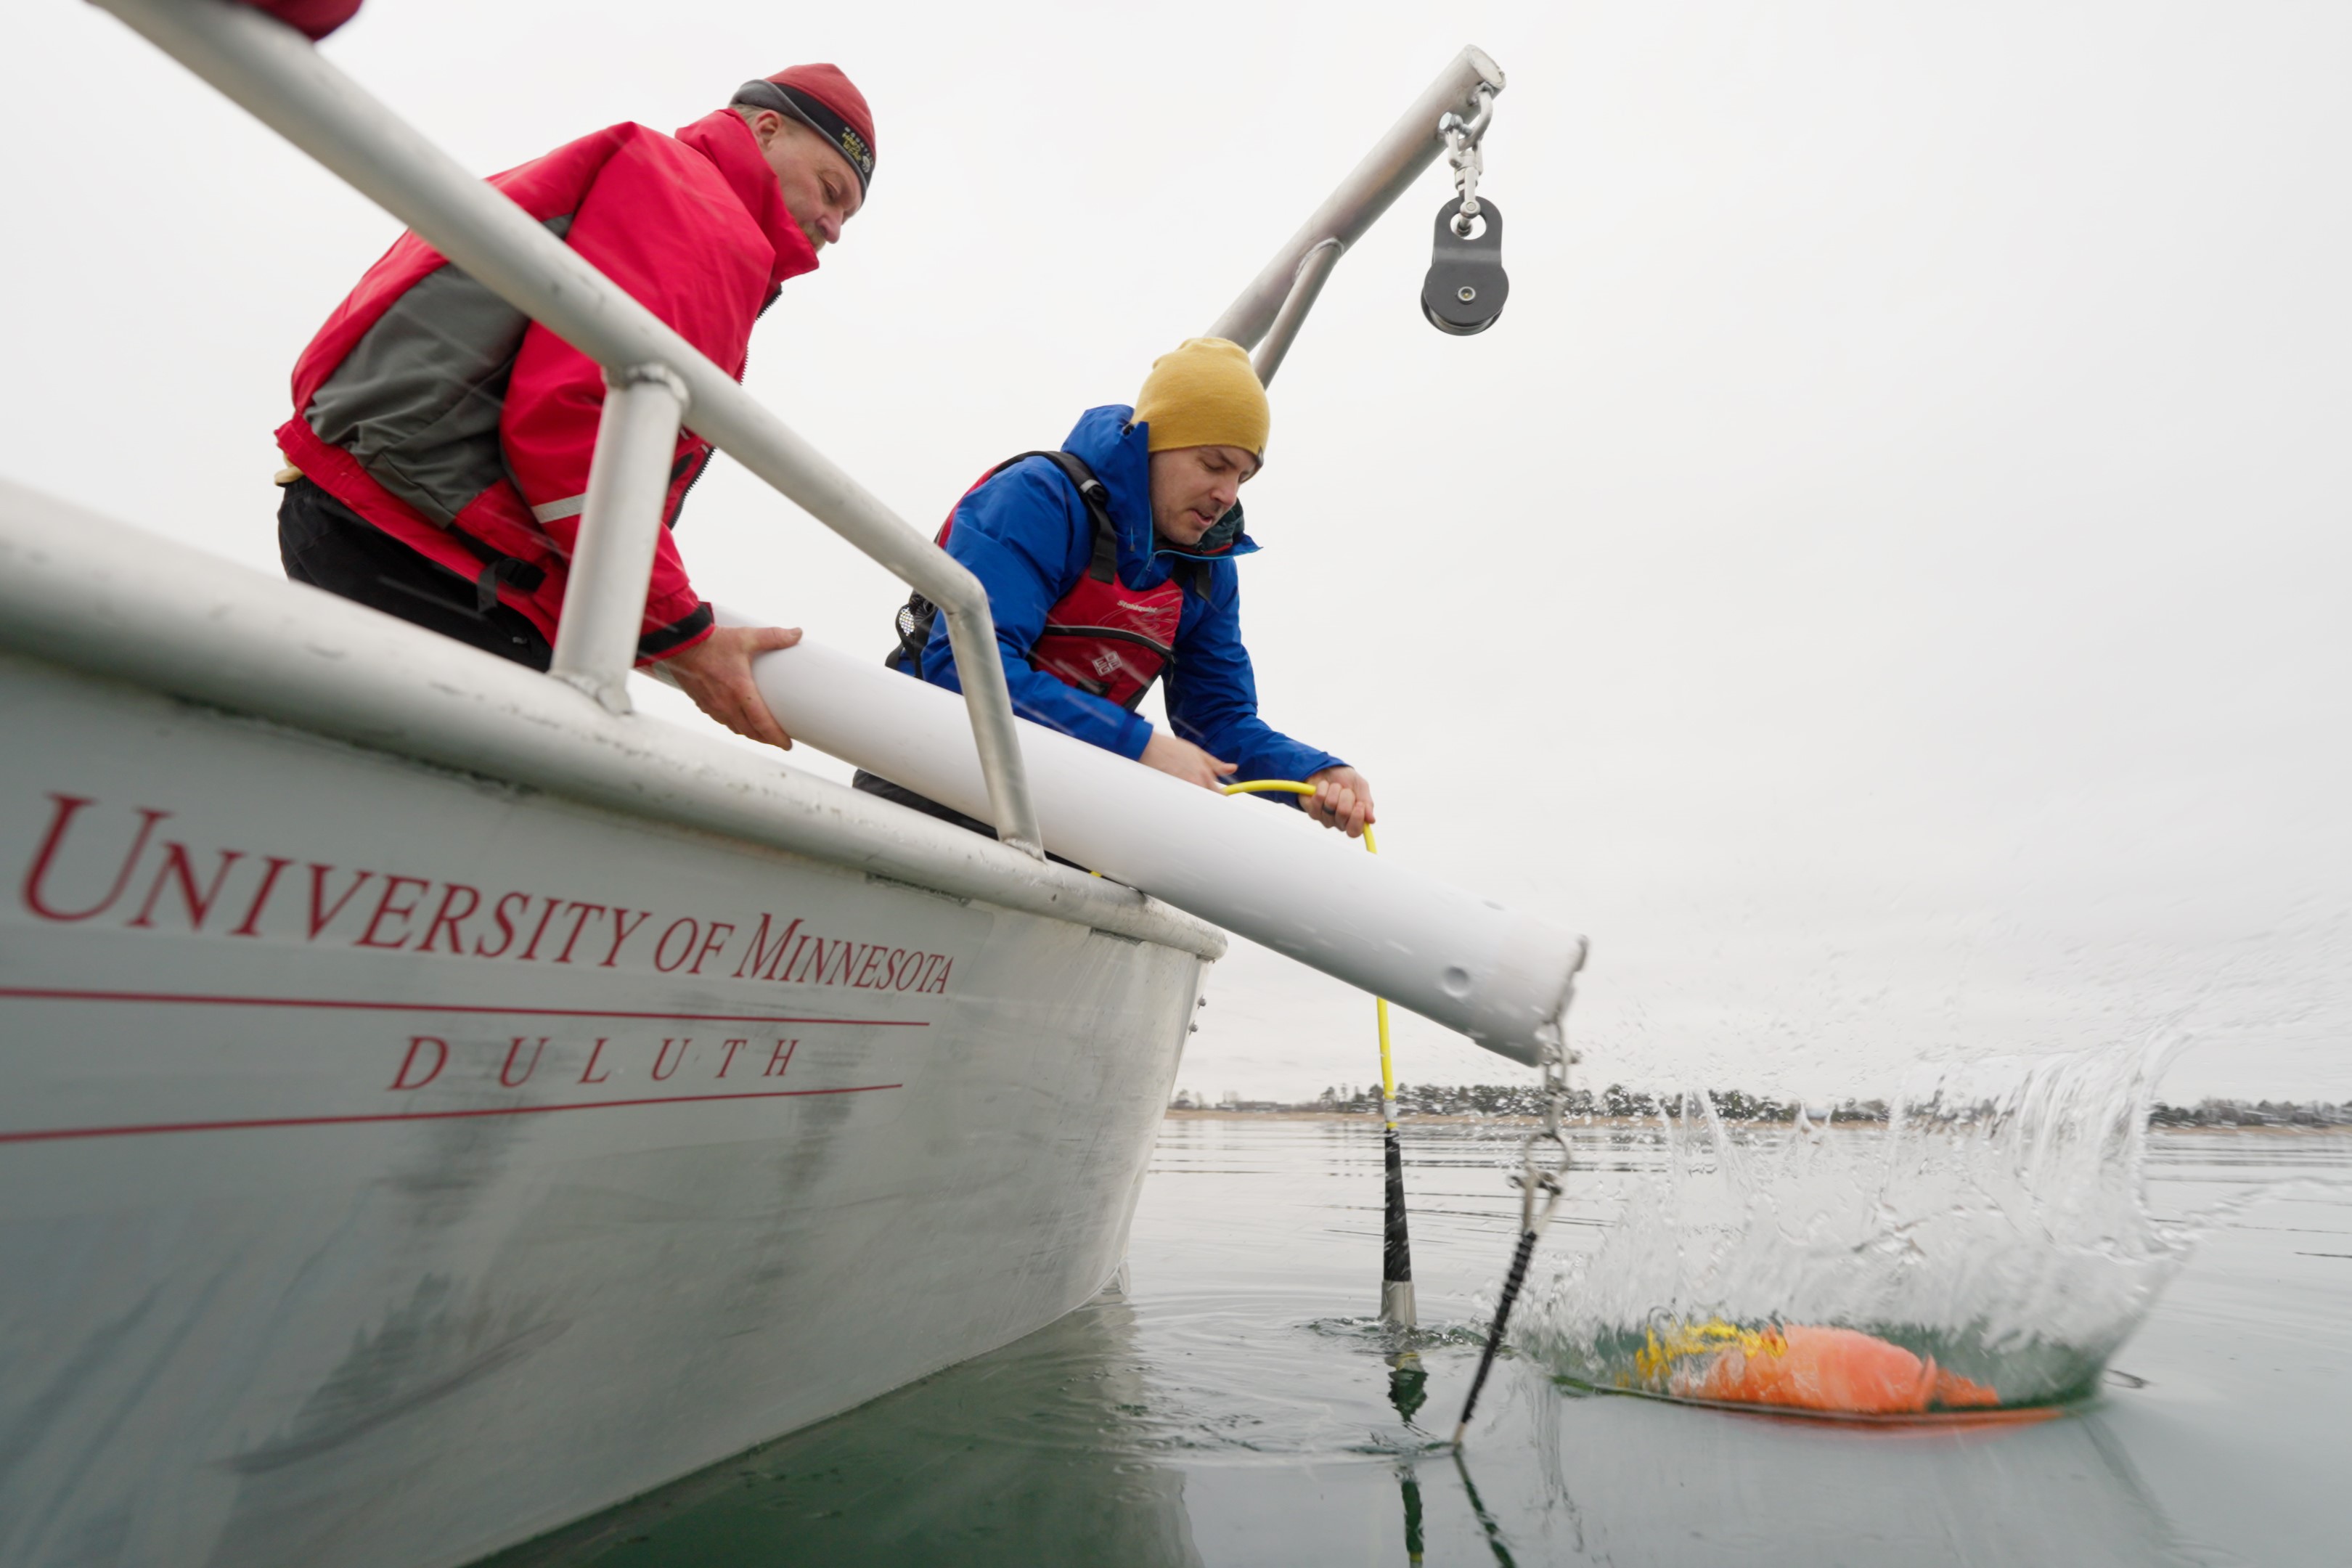 Jerry Henneck and Craig Hill deploy the buoy into Lake Superior from a small boat